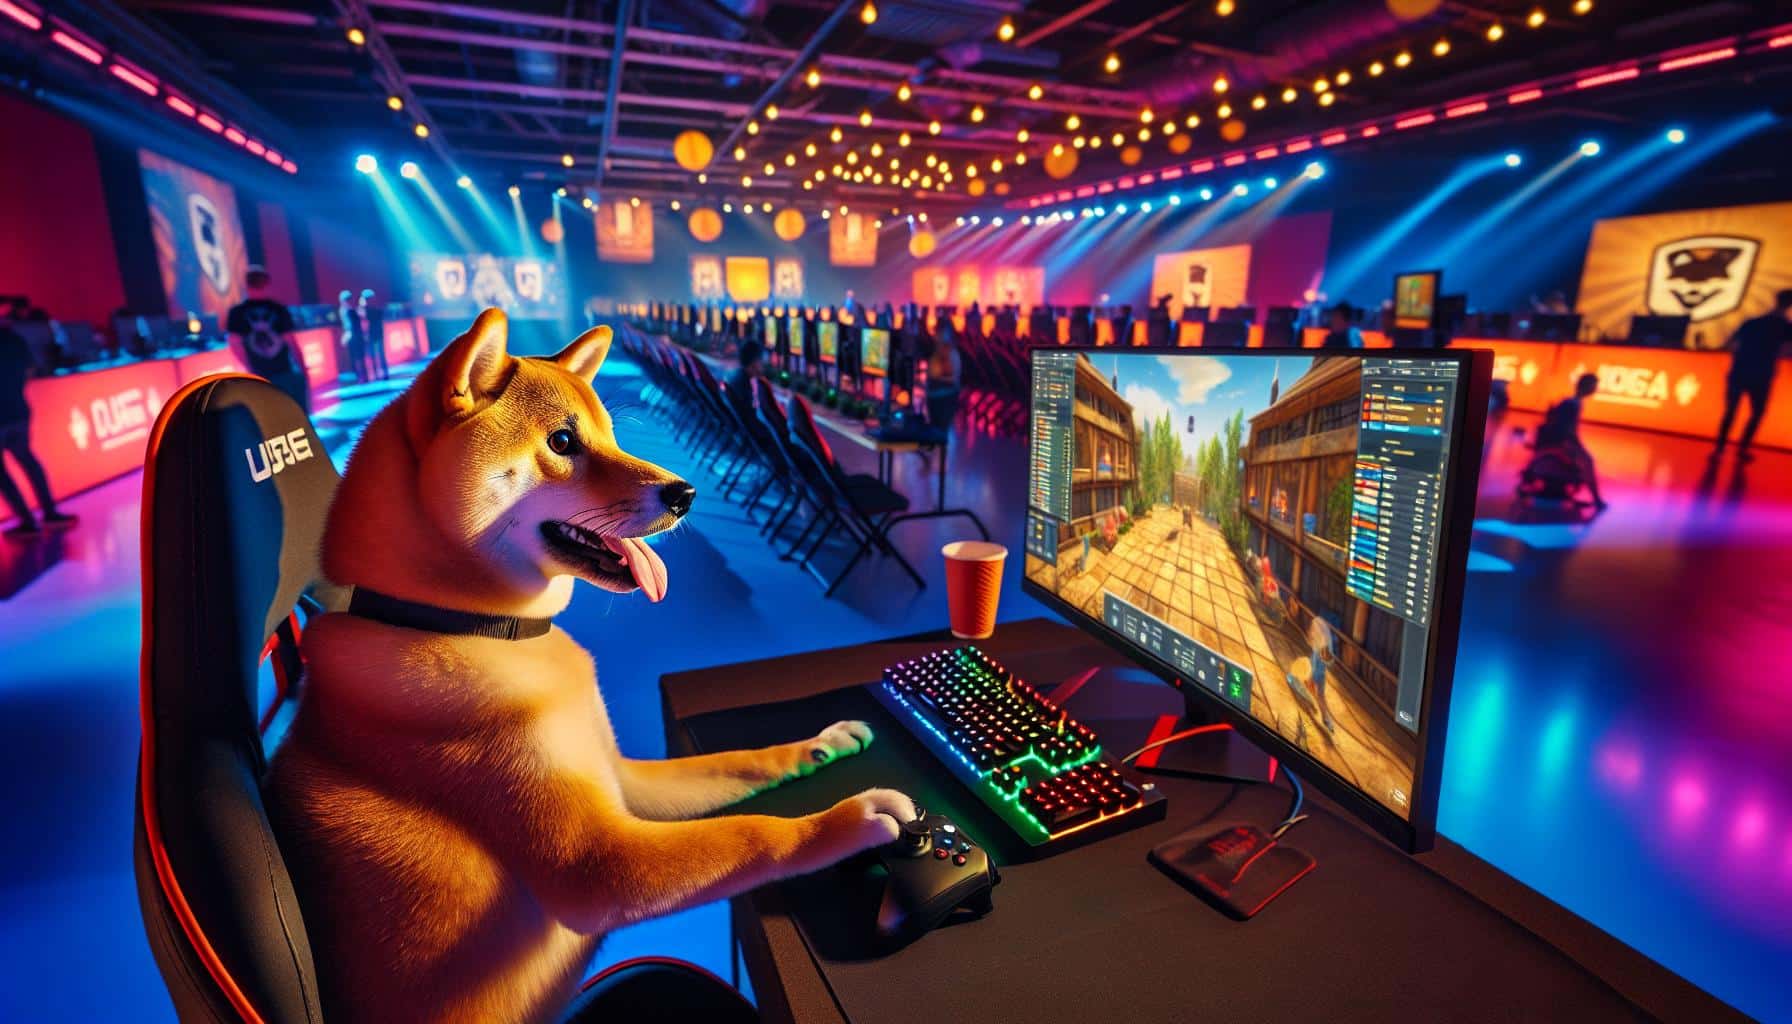 Four-legged gamer comes close to breaking record at charity event | FinOracle